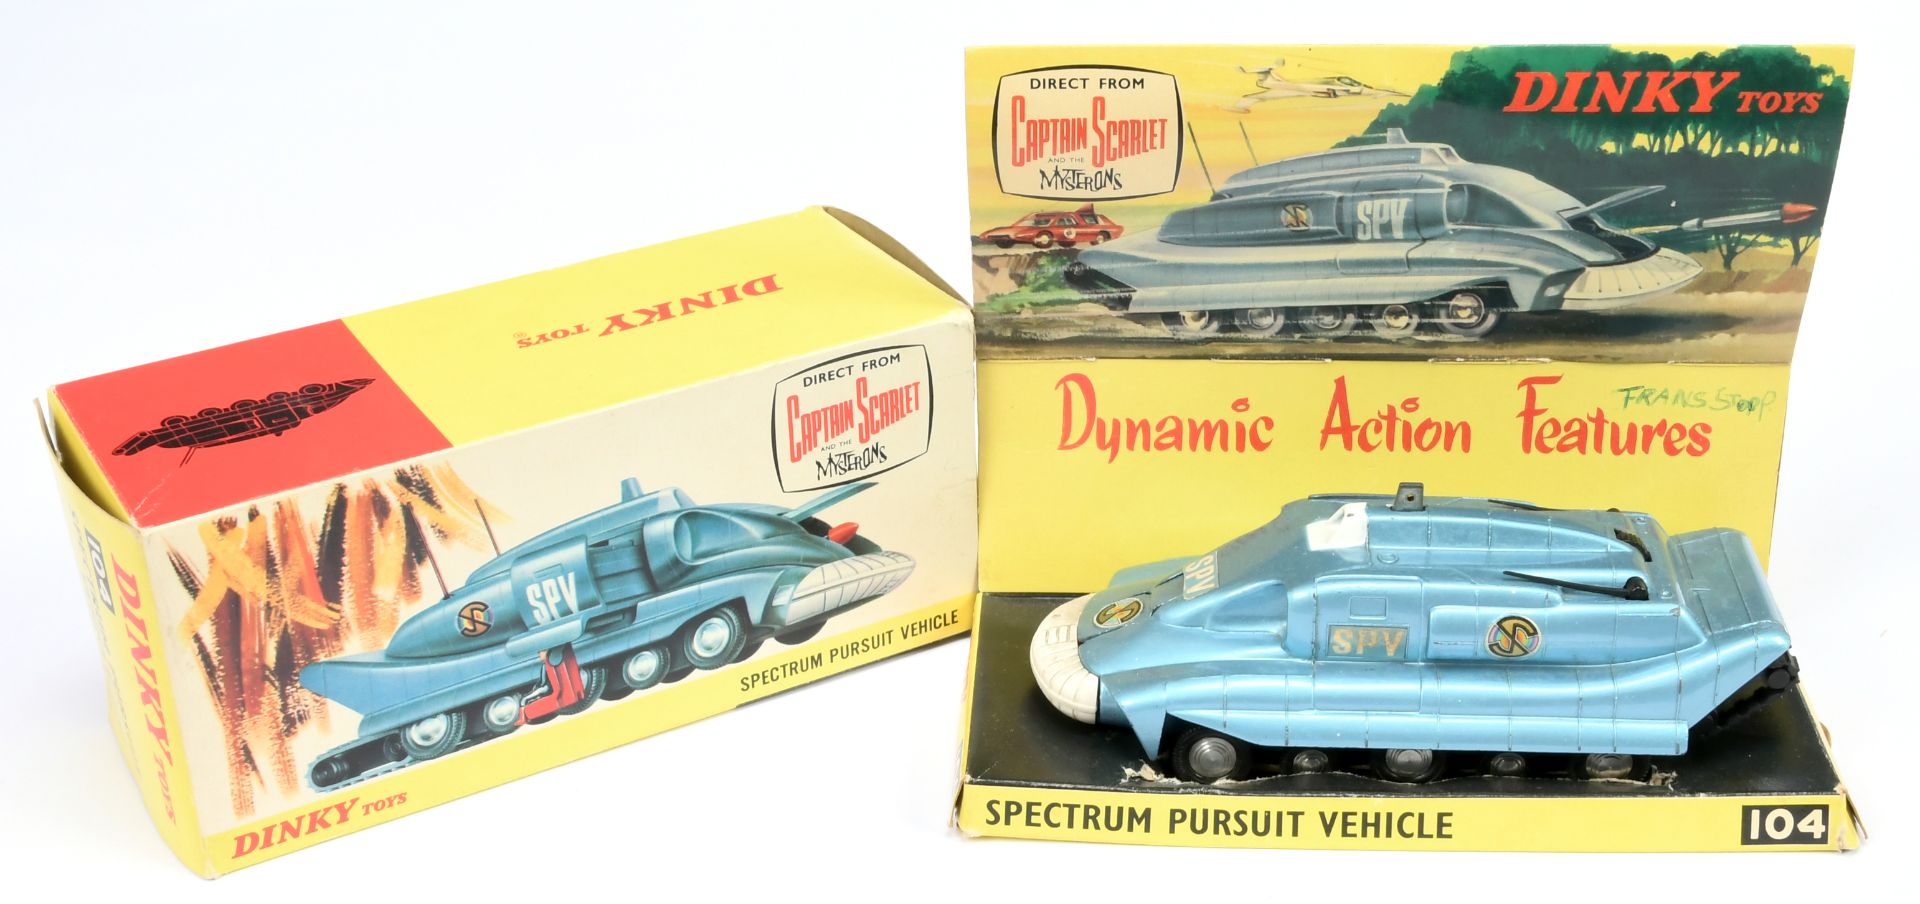 Dinky Toys 104 " Captain Scarlet" Spectrum Pursuit Vehicle - Blue body and base, white front bump...